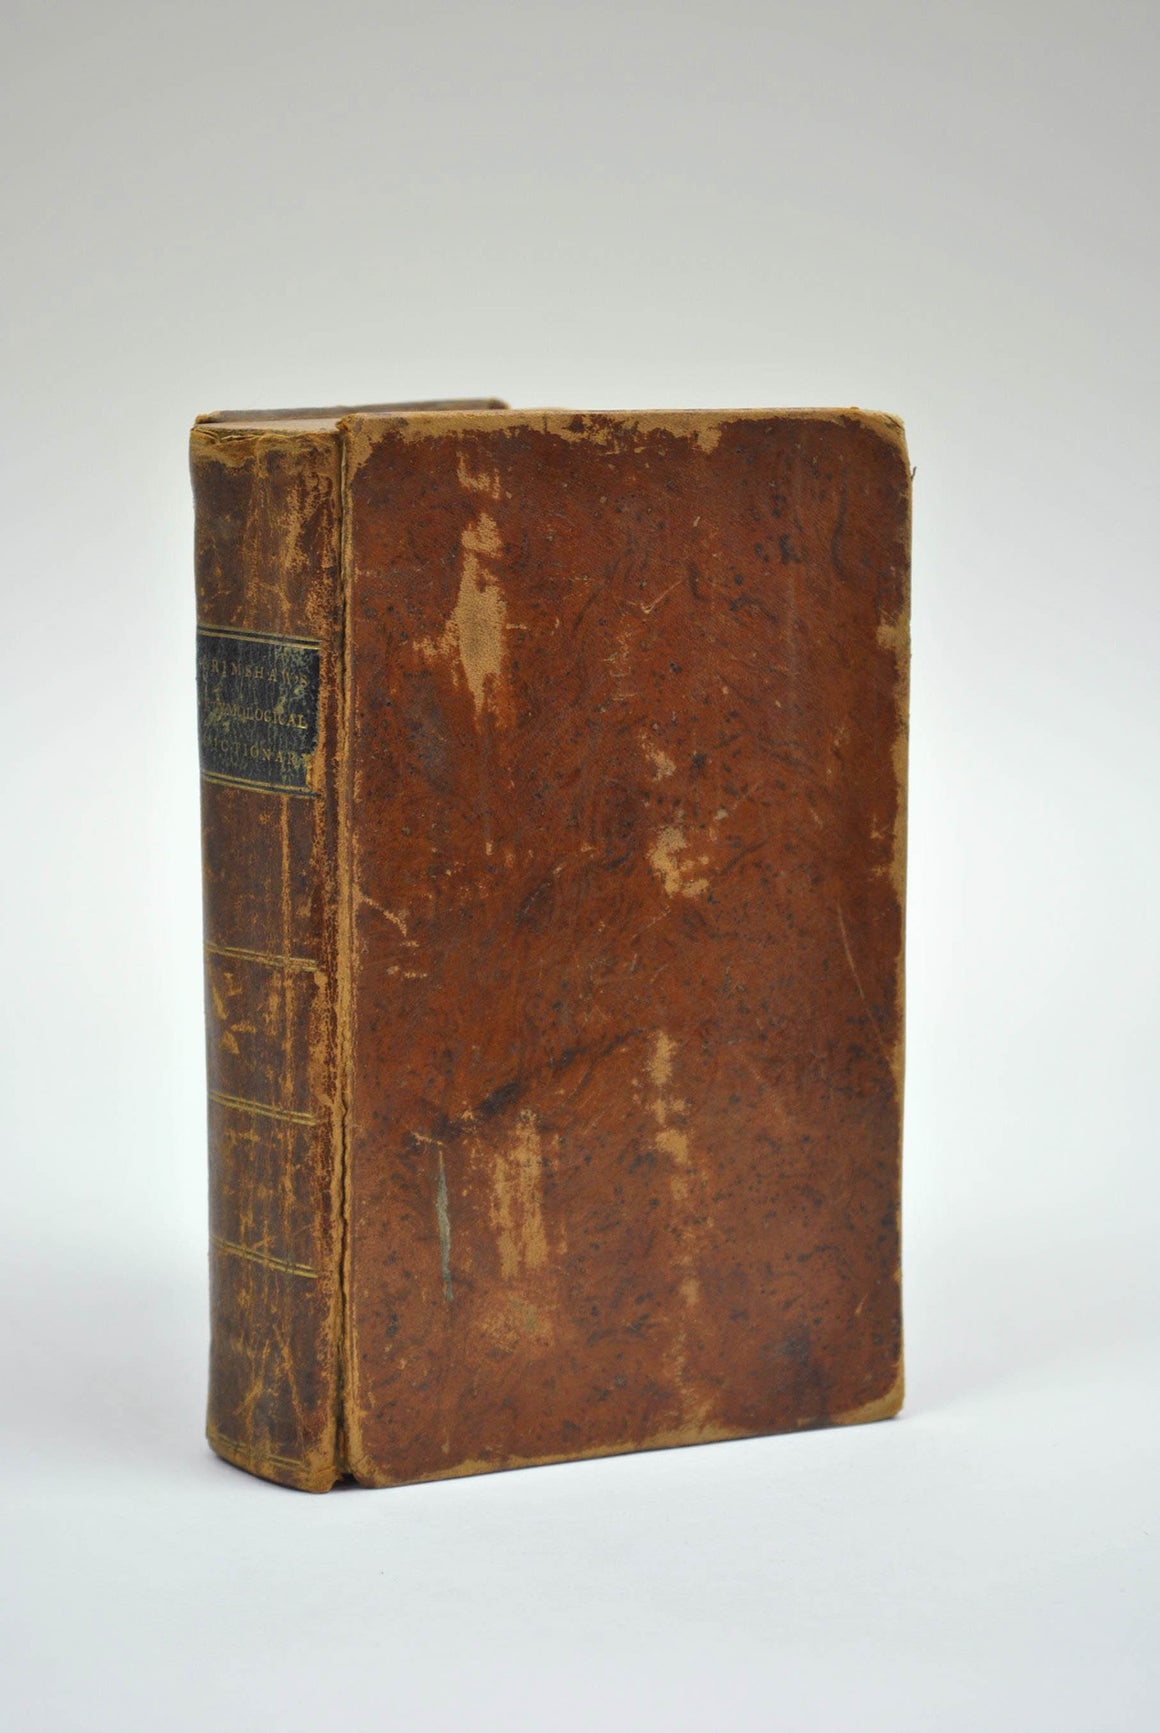 An Etymological Dictionary of the English Language by Will Grimshaw 1821